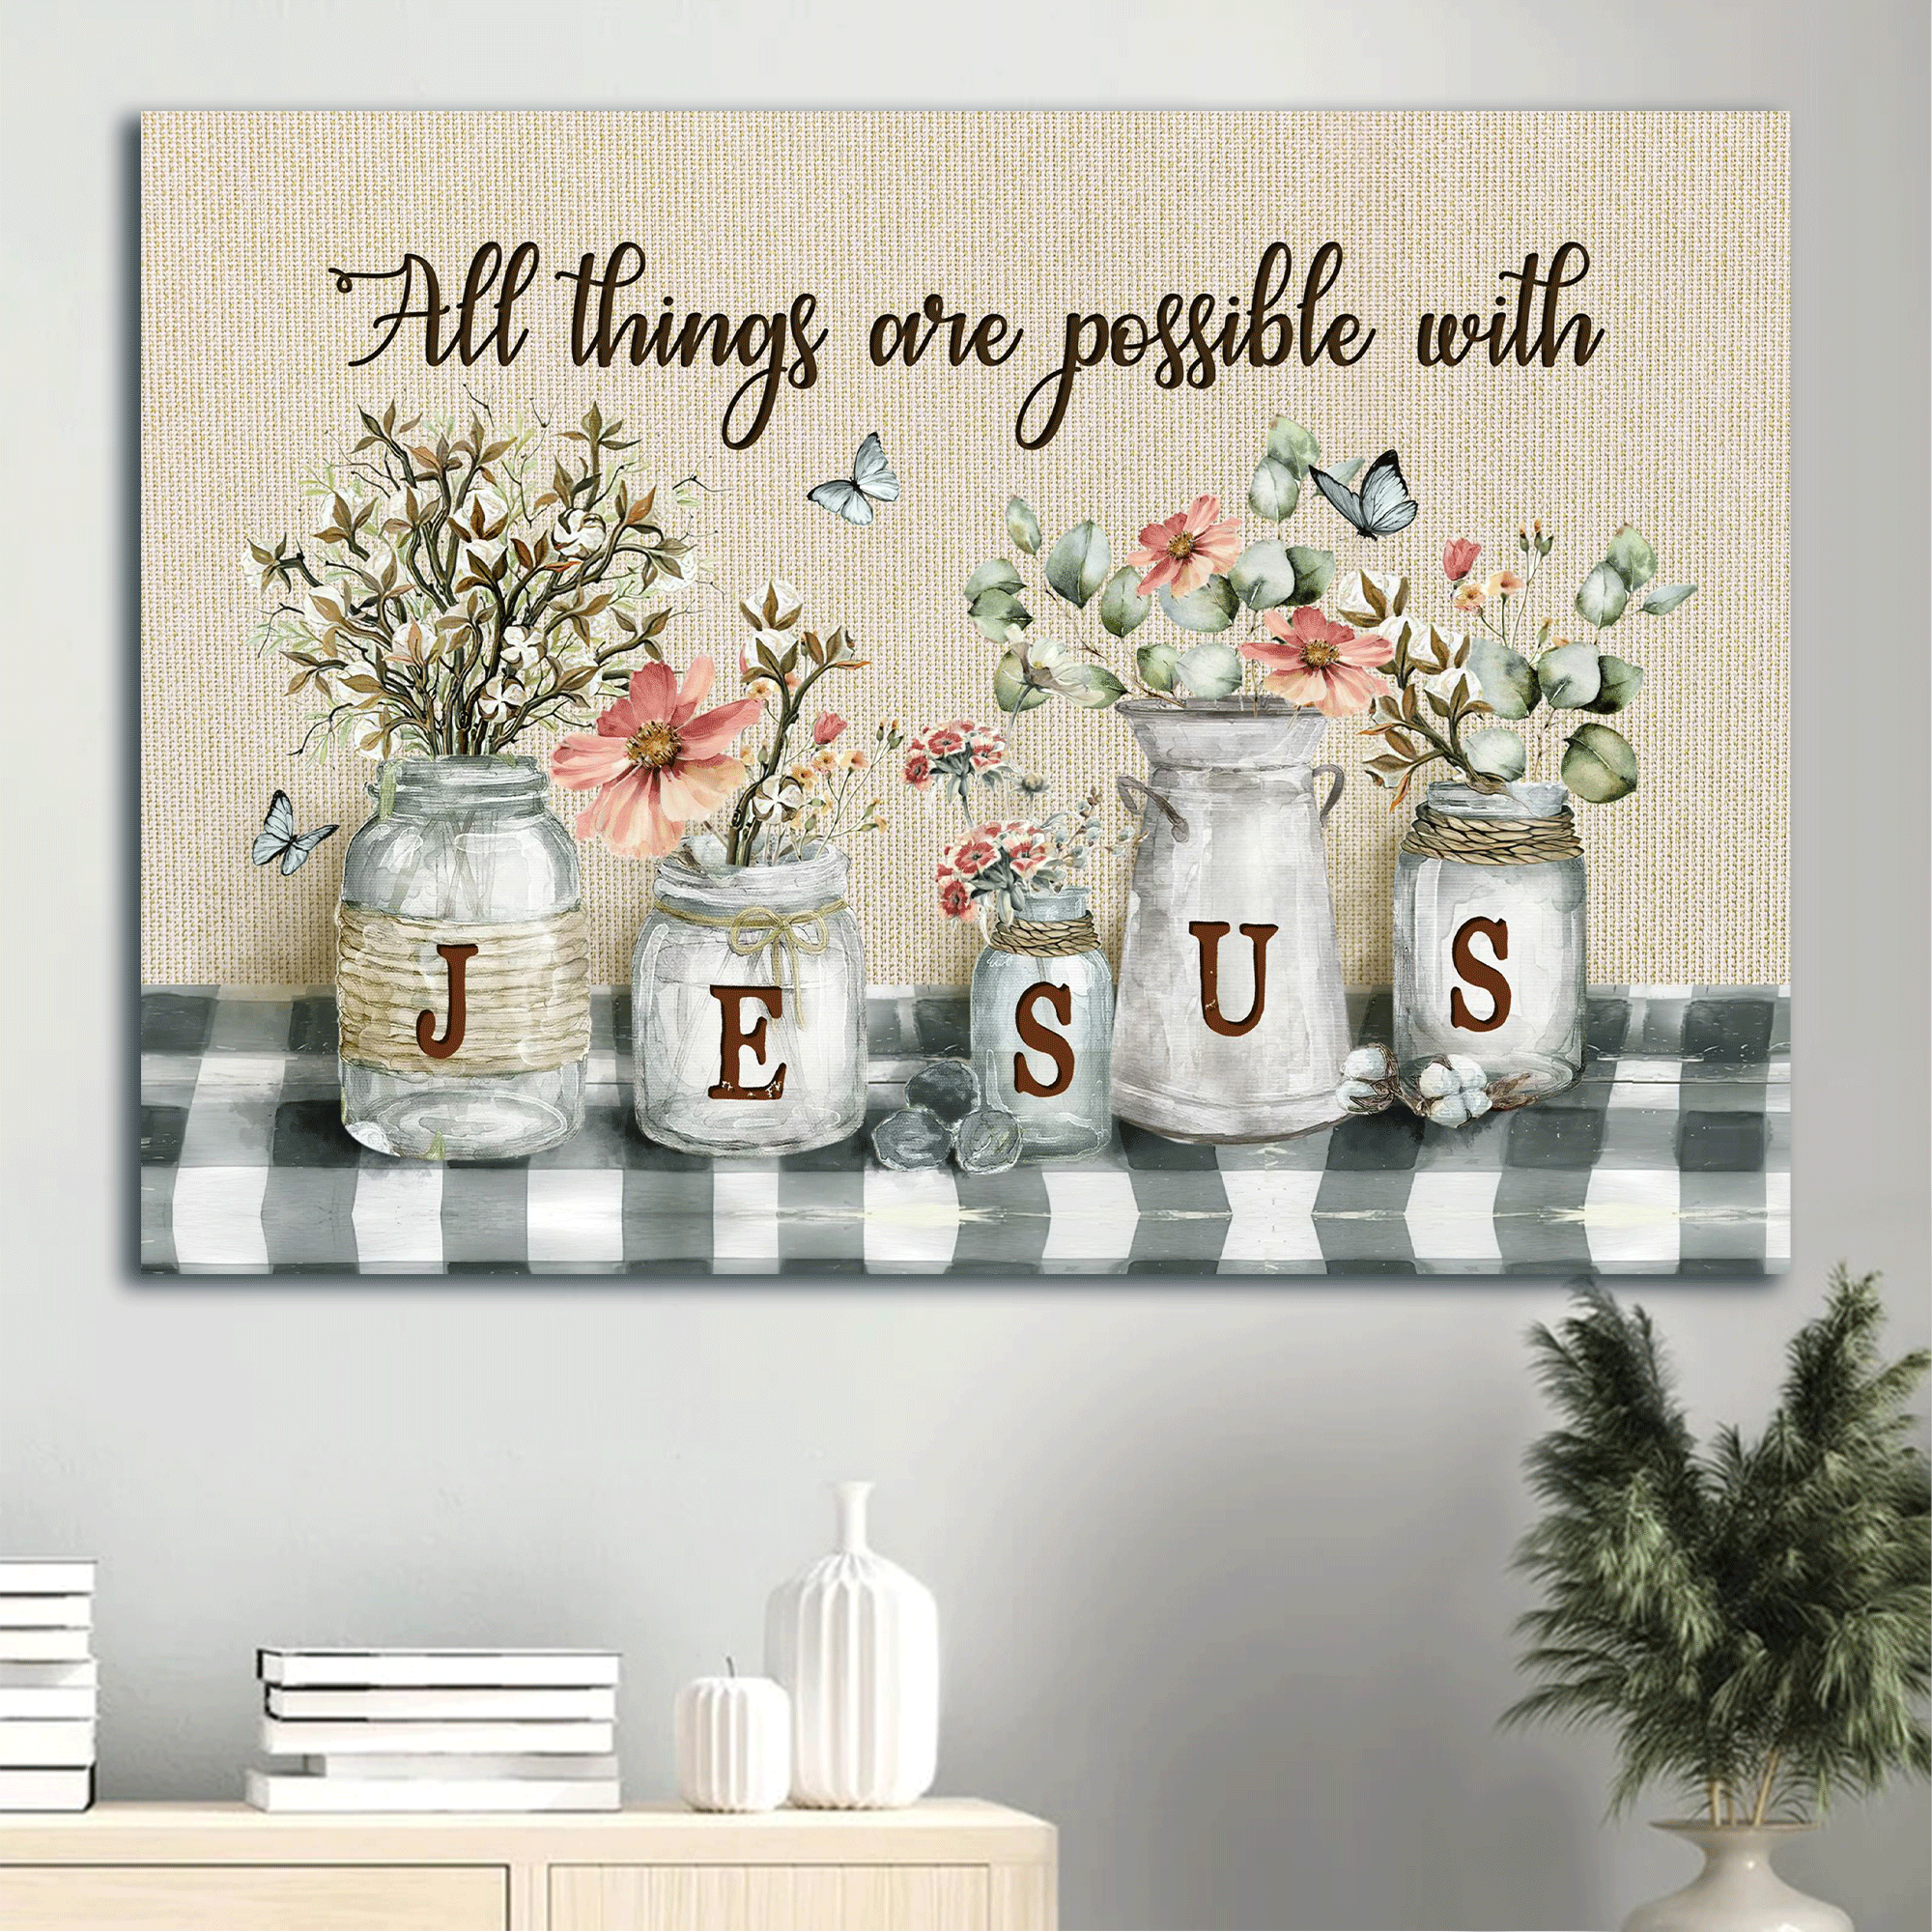 Jesus Landscape Canvas - Pretty cotton flower jar, Lovely blue butterfly Canvas - Gift for Christian - All things are possible with Jesus Landscape Canvas Prints, Christian Wall Art